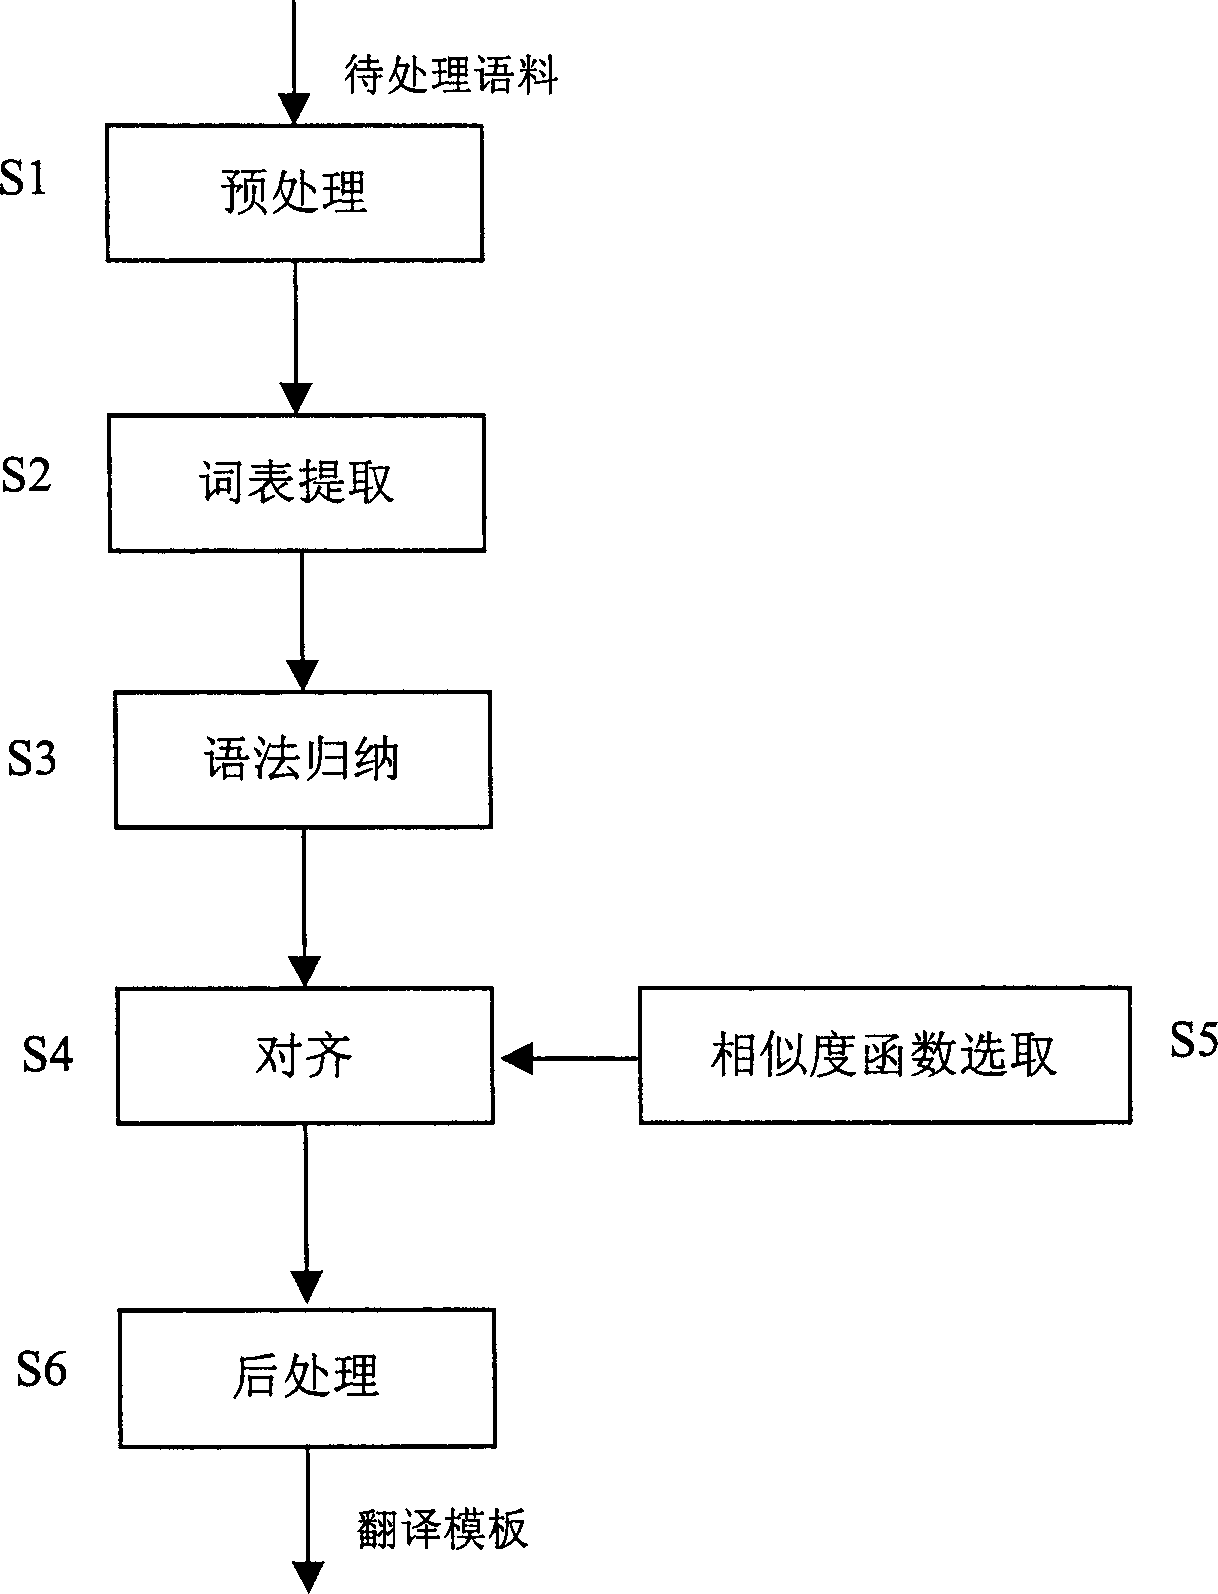 Method and apparatus for automatic acquisition of machine translation template